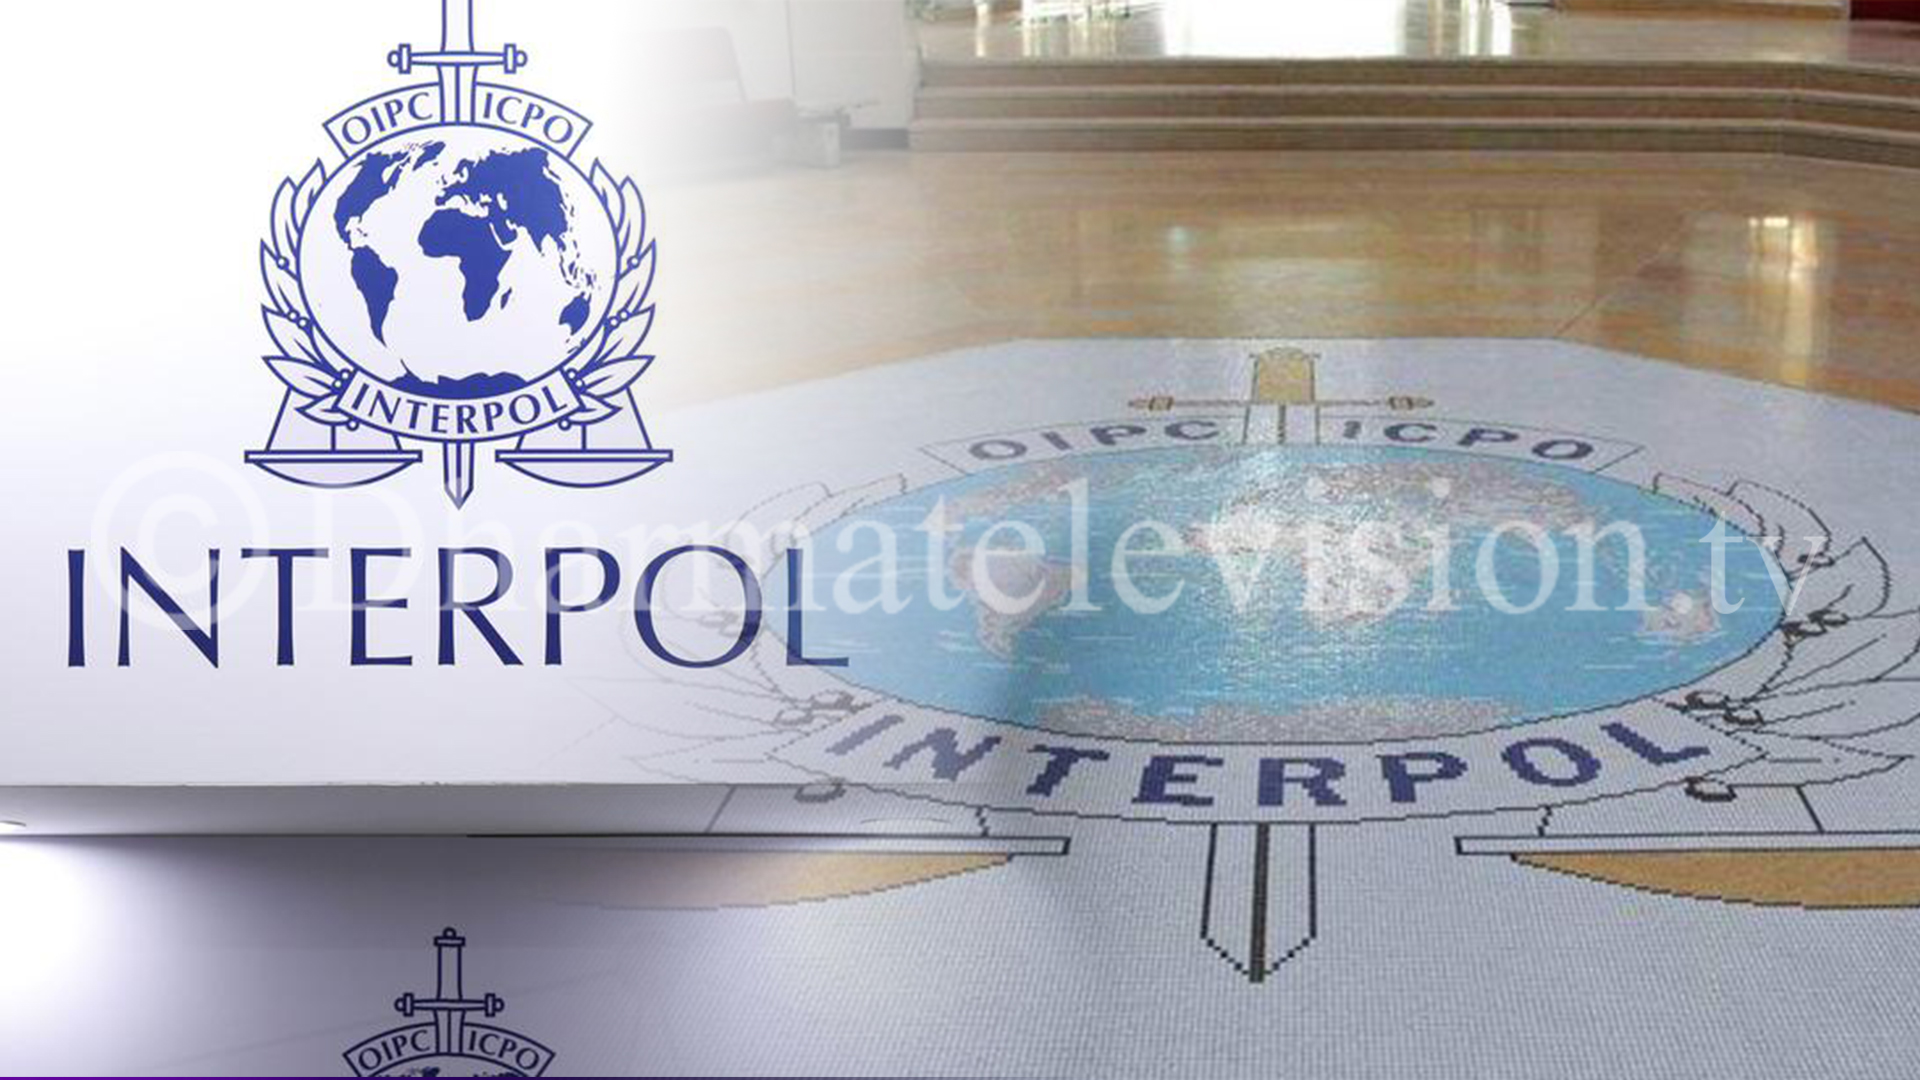 Interpol to postpone its 194-member General Assembly for the first time due to Covid-19